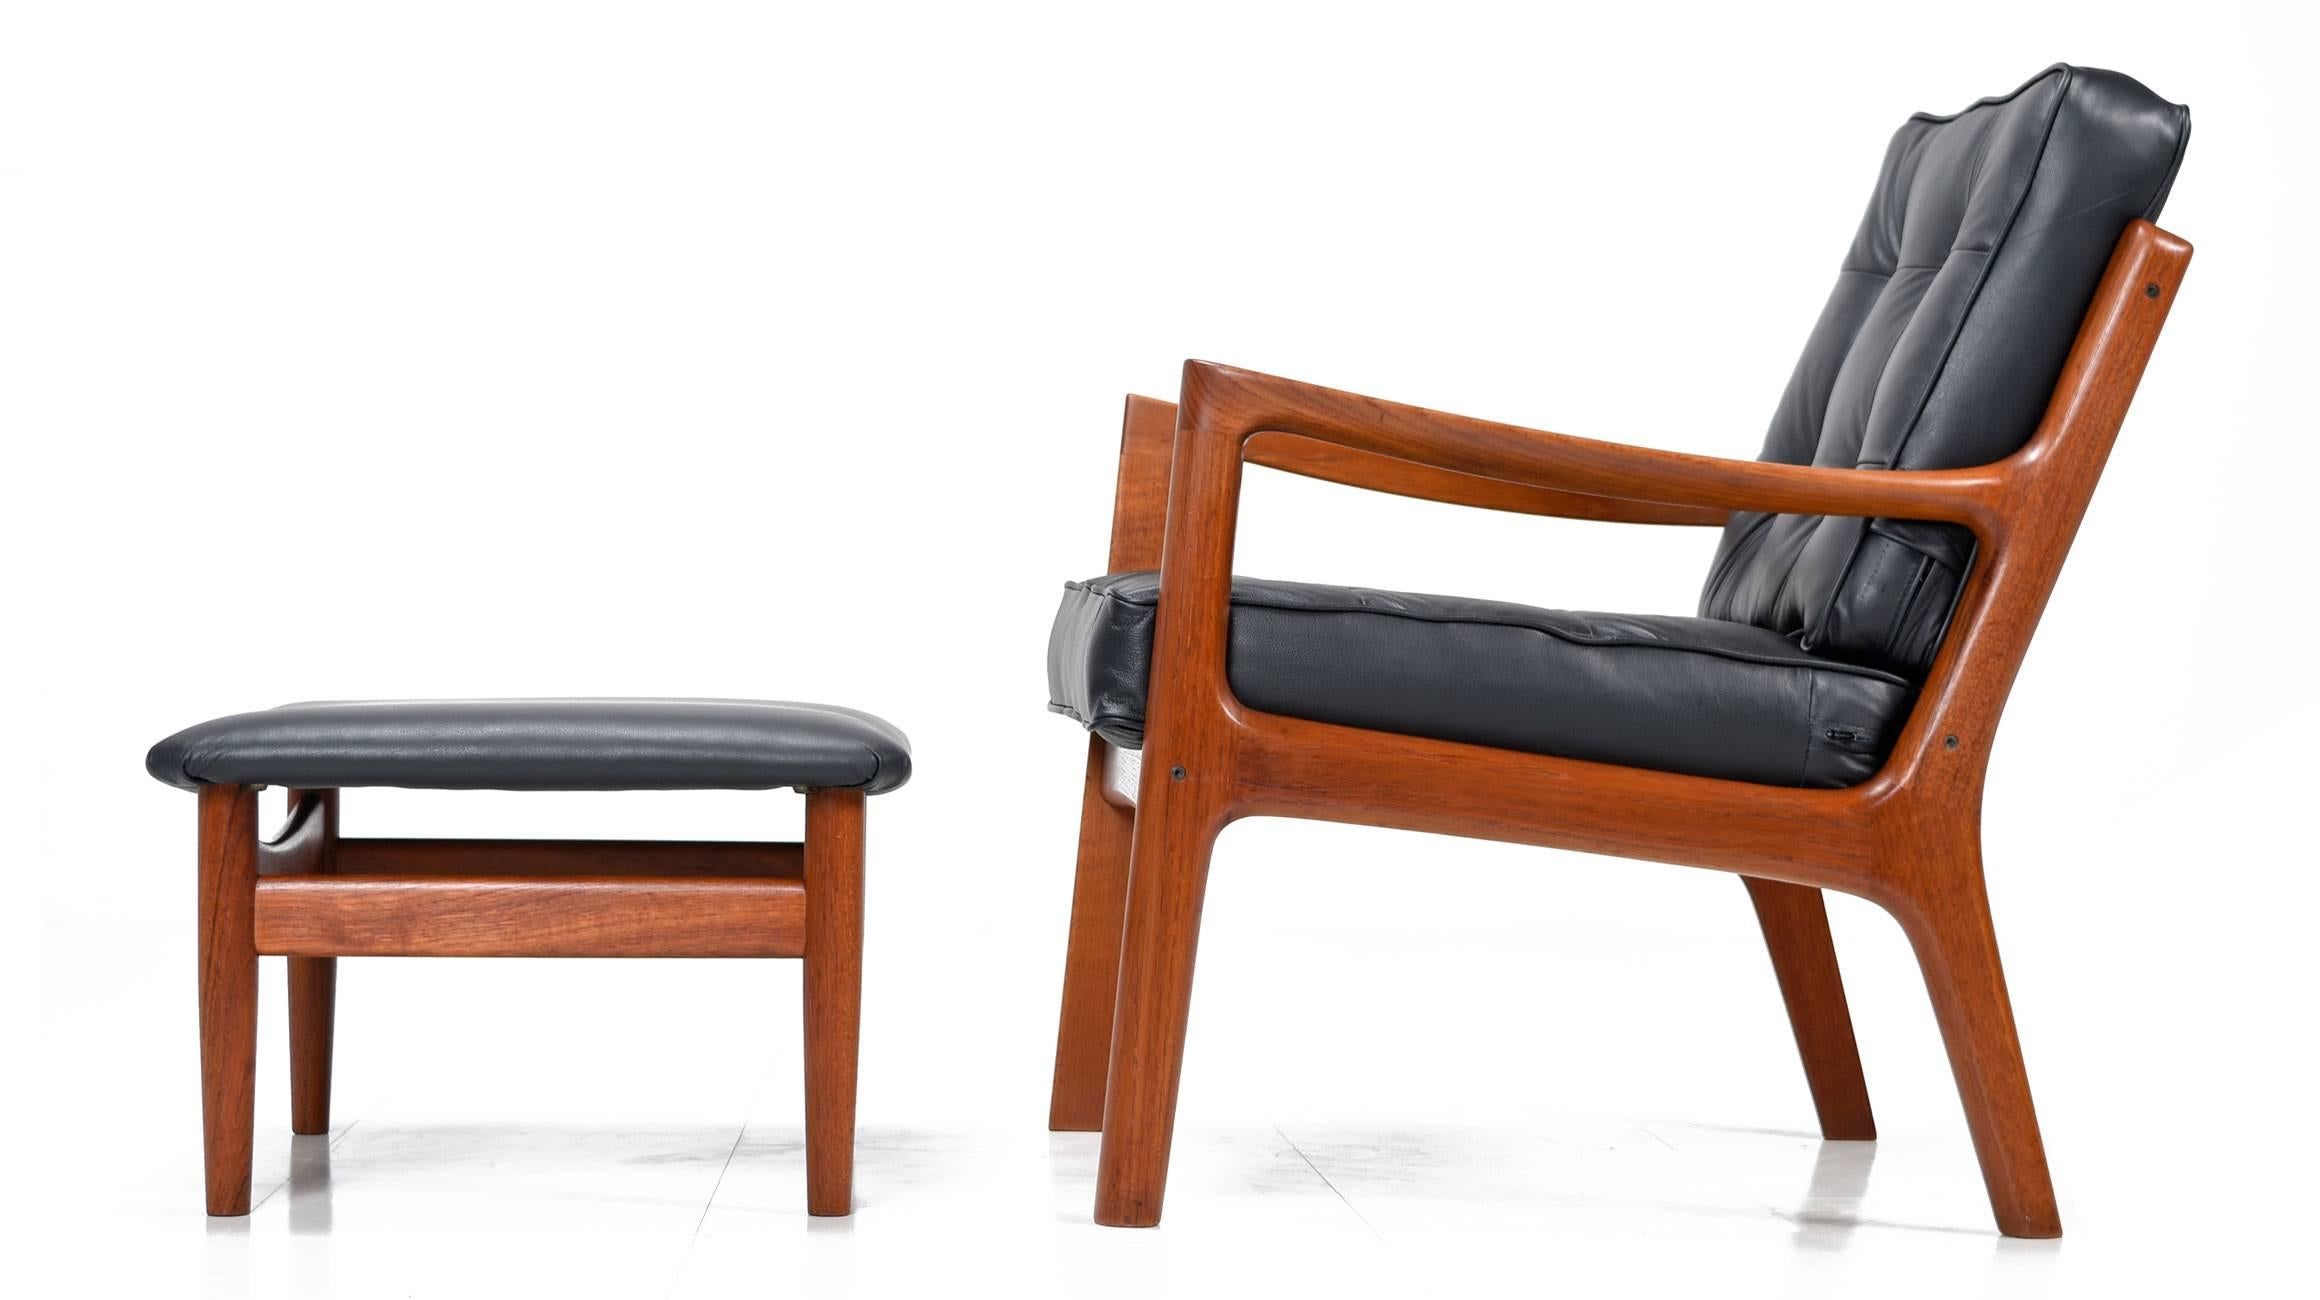 Ole Wanscher easy chair model #166, from the Senator series, by France & Son. This stunning Mid-Century Modern teak and black leather armchair and ottoman feature clean lines and architectural details. It was made in 1951 in Denmark.